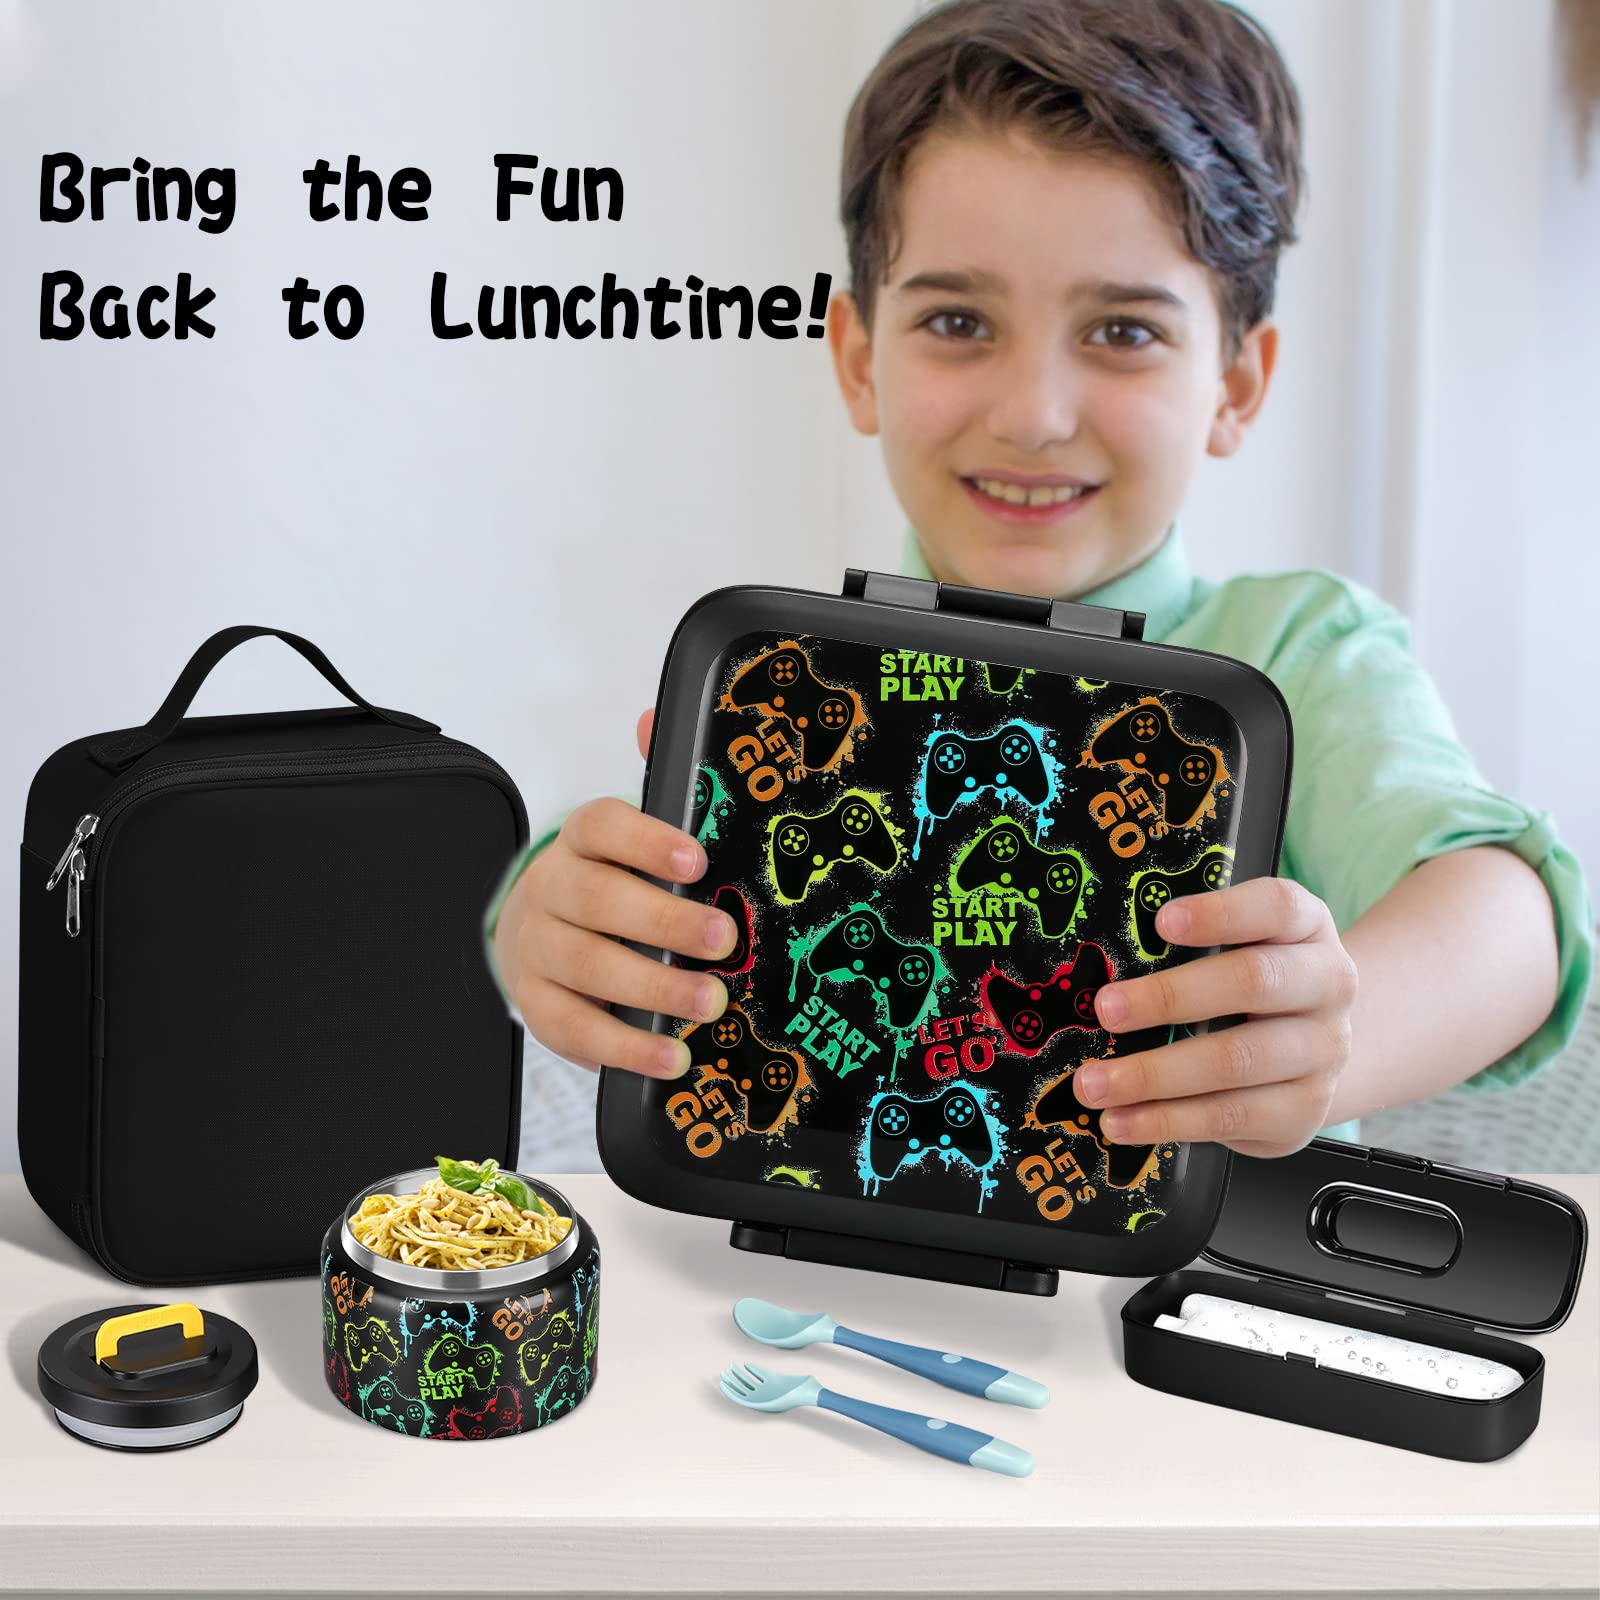 JXXM Bento Lunch Box for Kids With 8oz Soup thermo,Leak-proof Lunch Containers with 5 Compartment,thermo Food Jar and Lunch Bag, Food Containers for School (A-Black(Game Consoley))